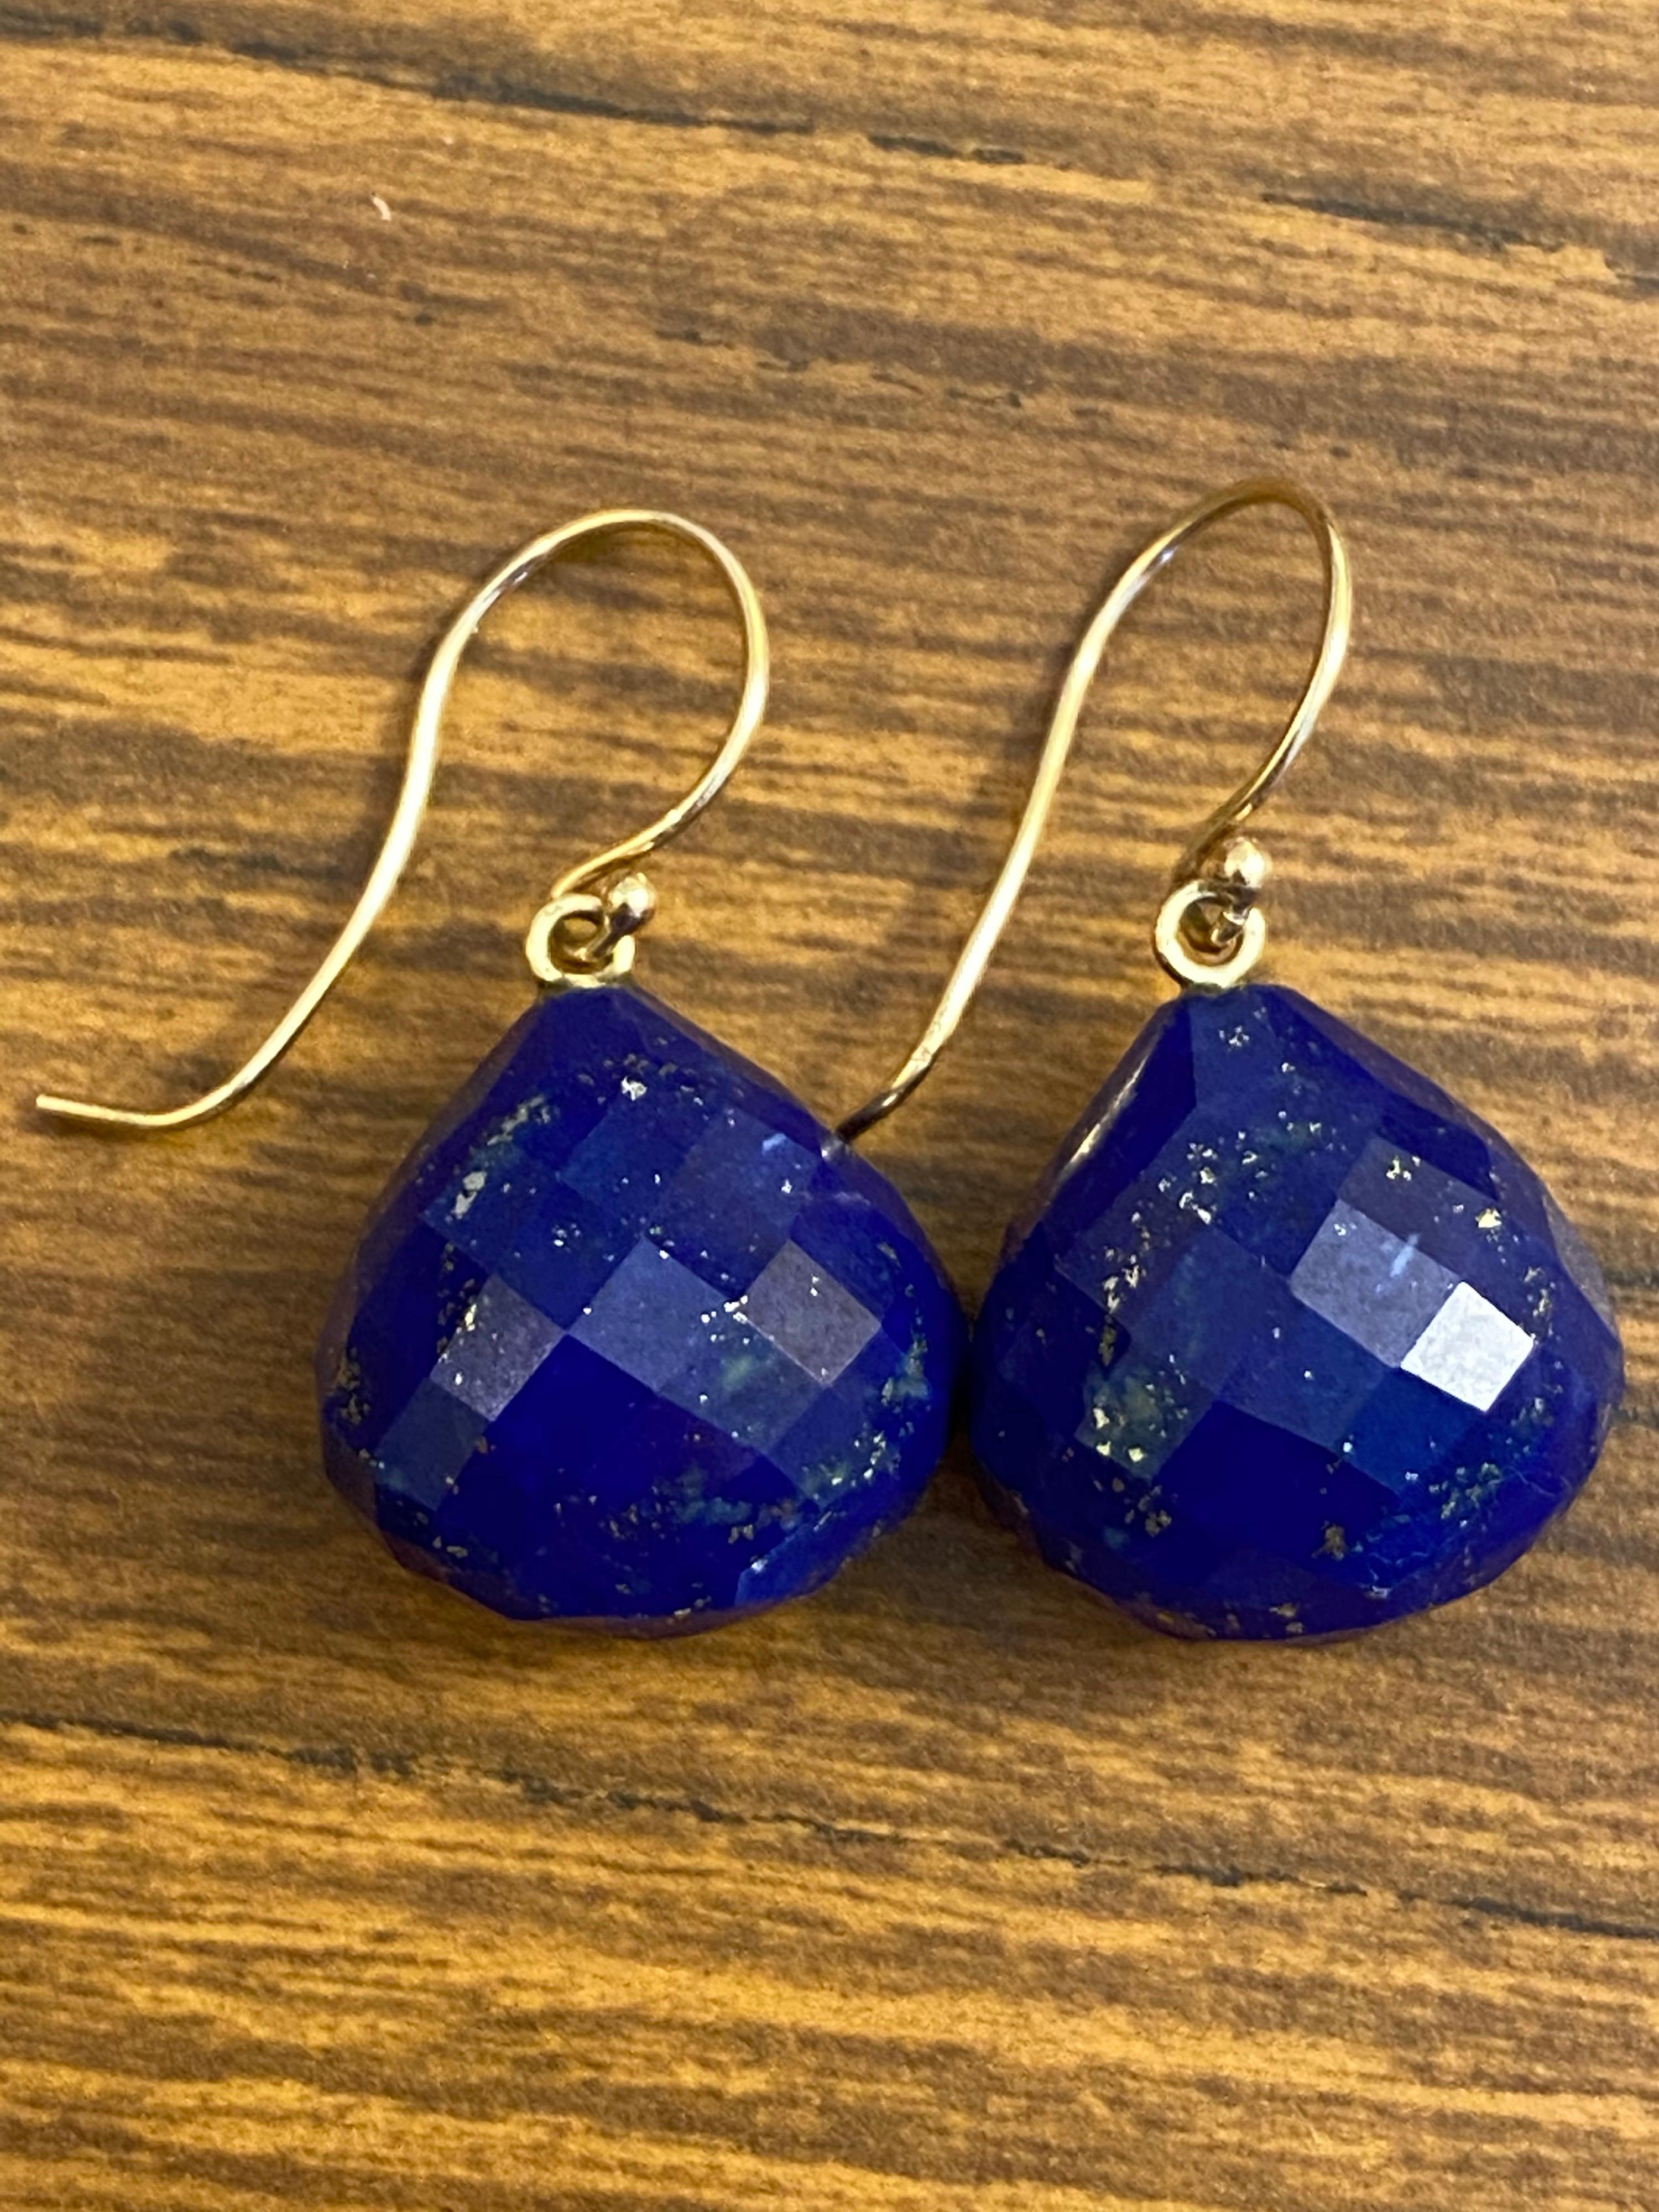 Chunky Faceted Briolettes in a Rich Blue Fine Quality Lapis Lazuli with little flecks of golden pyrite throughout that glitter in the sunlight. Very light on the ear and are Bohemian Chic. 14 Karat Yellow Gold Sherpards Hooks and measures just over